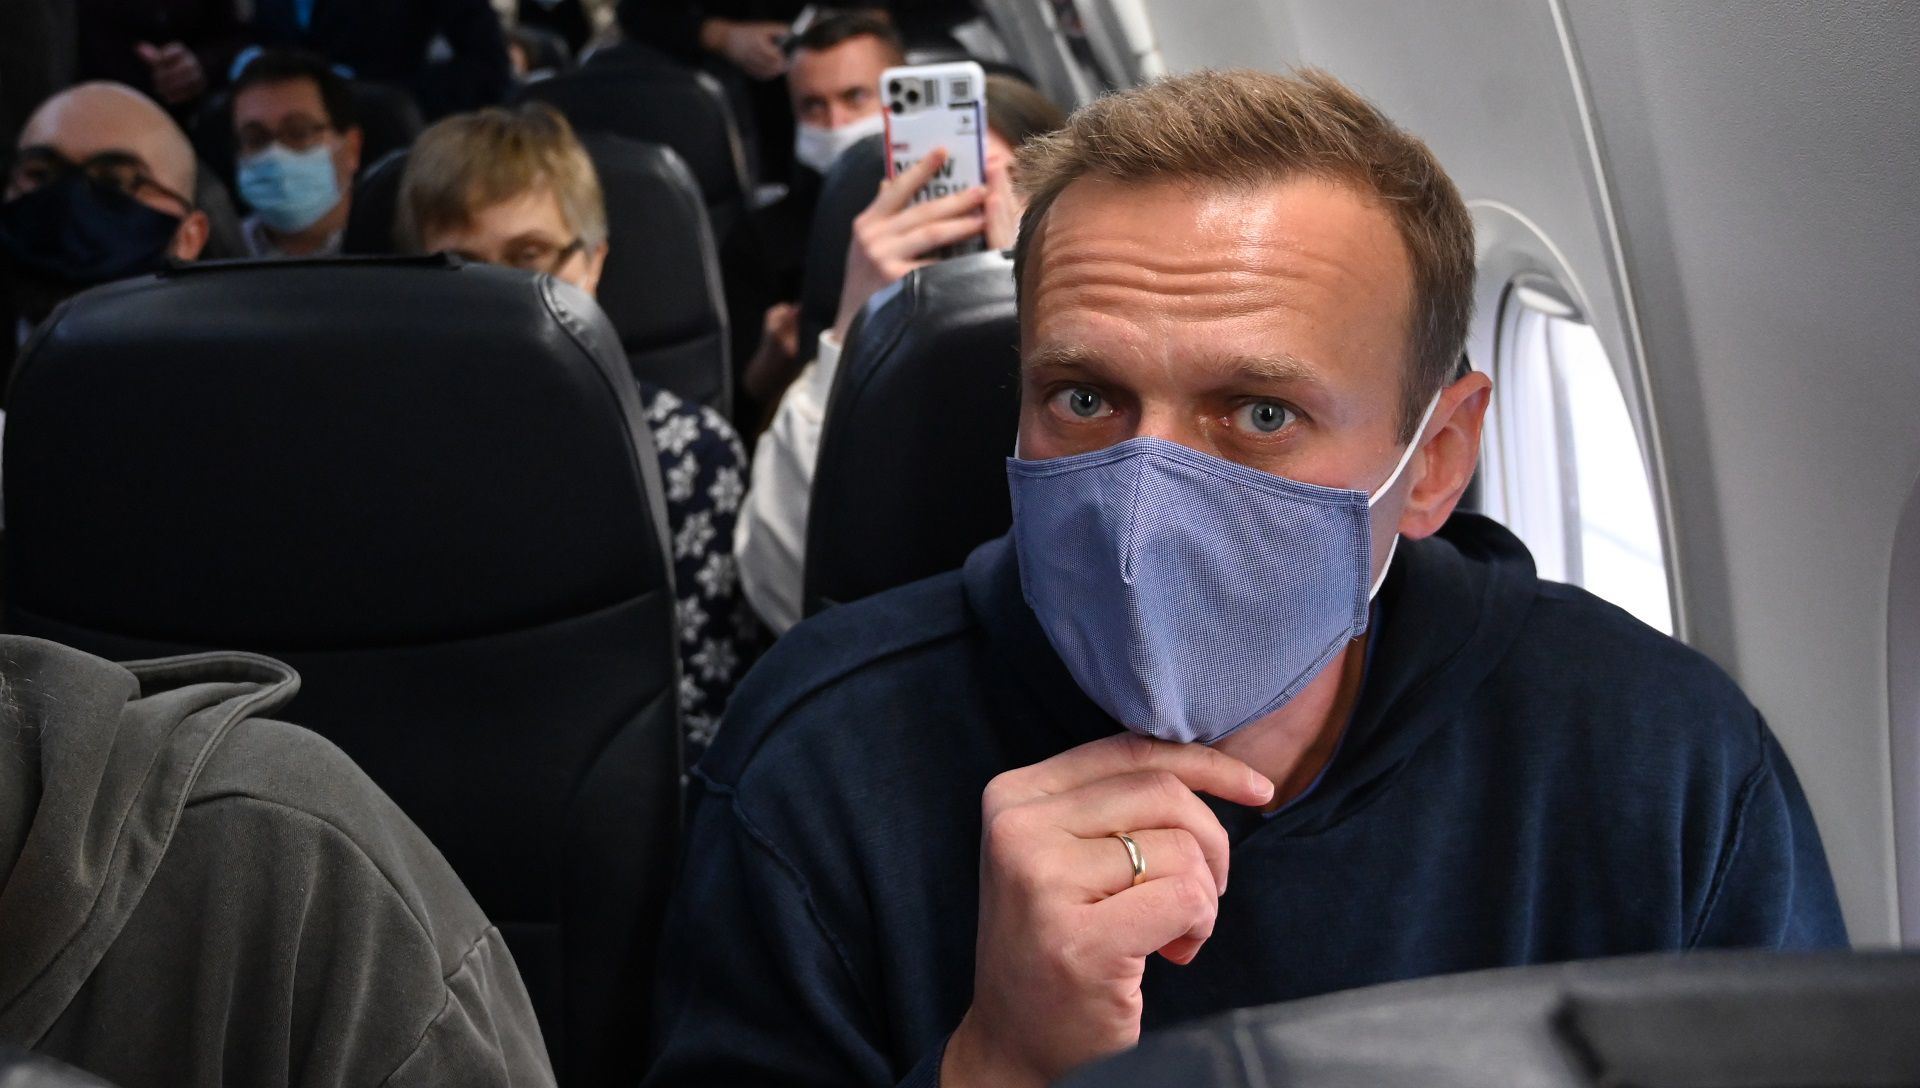 Russian opposition leader Alexei Navalny sits in a Pobeda airlines plane heading to Moscow before take-off from Berlin Brandenburg Airport (BER) in Schoenefeld, southeast of Berlin, on January 17, 2021. - Chief Kremlin critic Alexei Navalny returns to Russia from Germany on January 17, facing imminent arrest after authorities warned they would detain him. The 44-year-old opposition leader is flying back to Moscow after spending several months in Germany recovering from a poisoning attack that he said was carried out on the orders of President Vladimir Putin. (Photo by Kirill KUDRYAVTSEV / AFP)